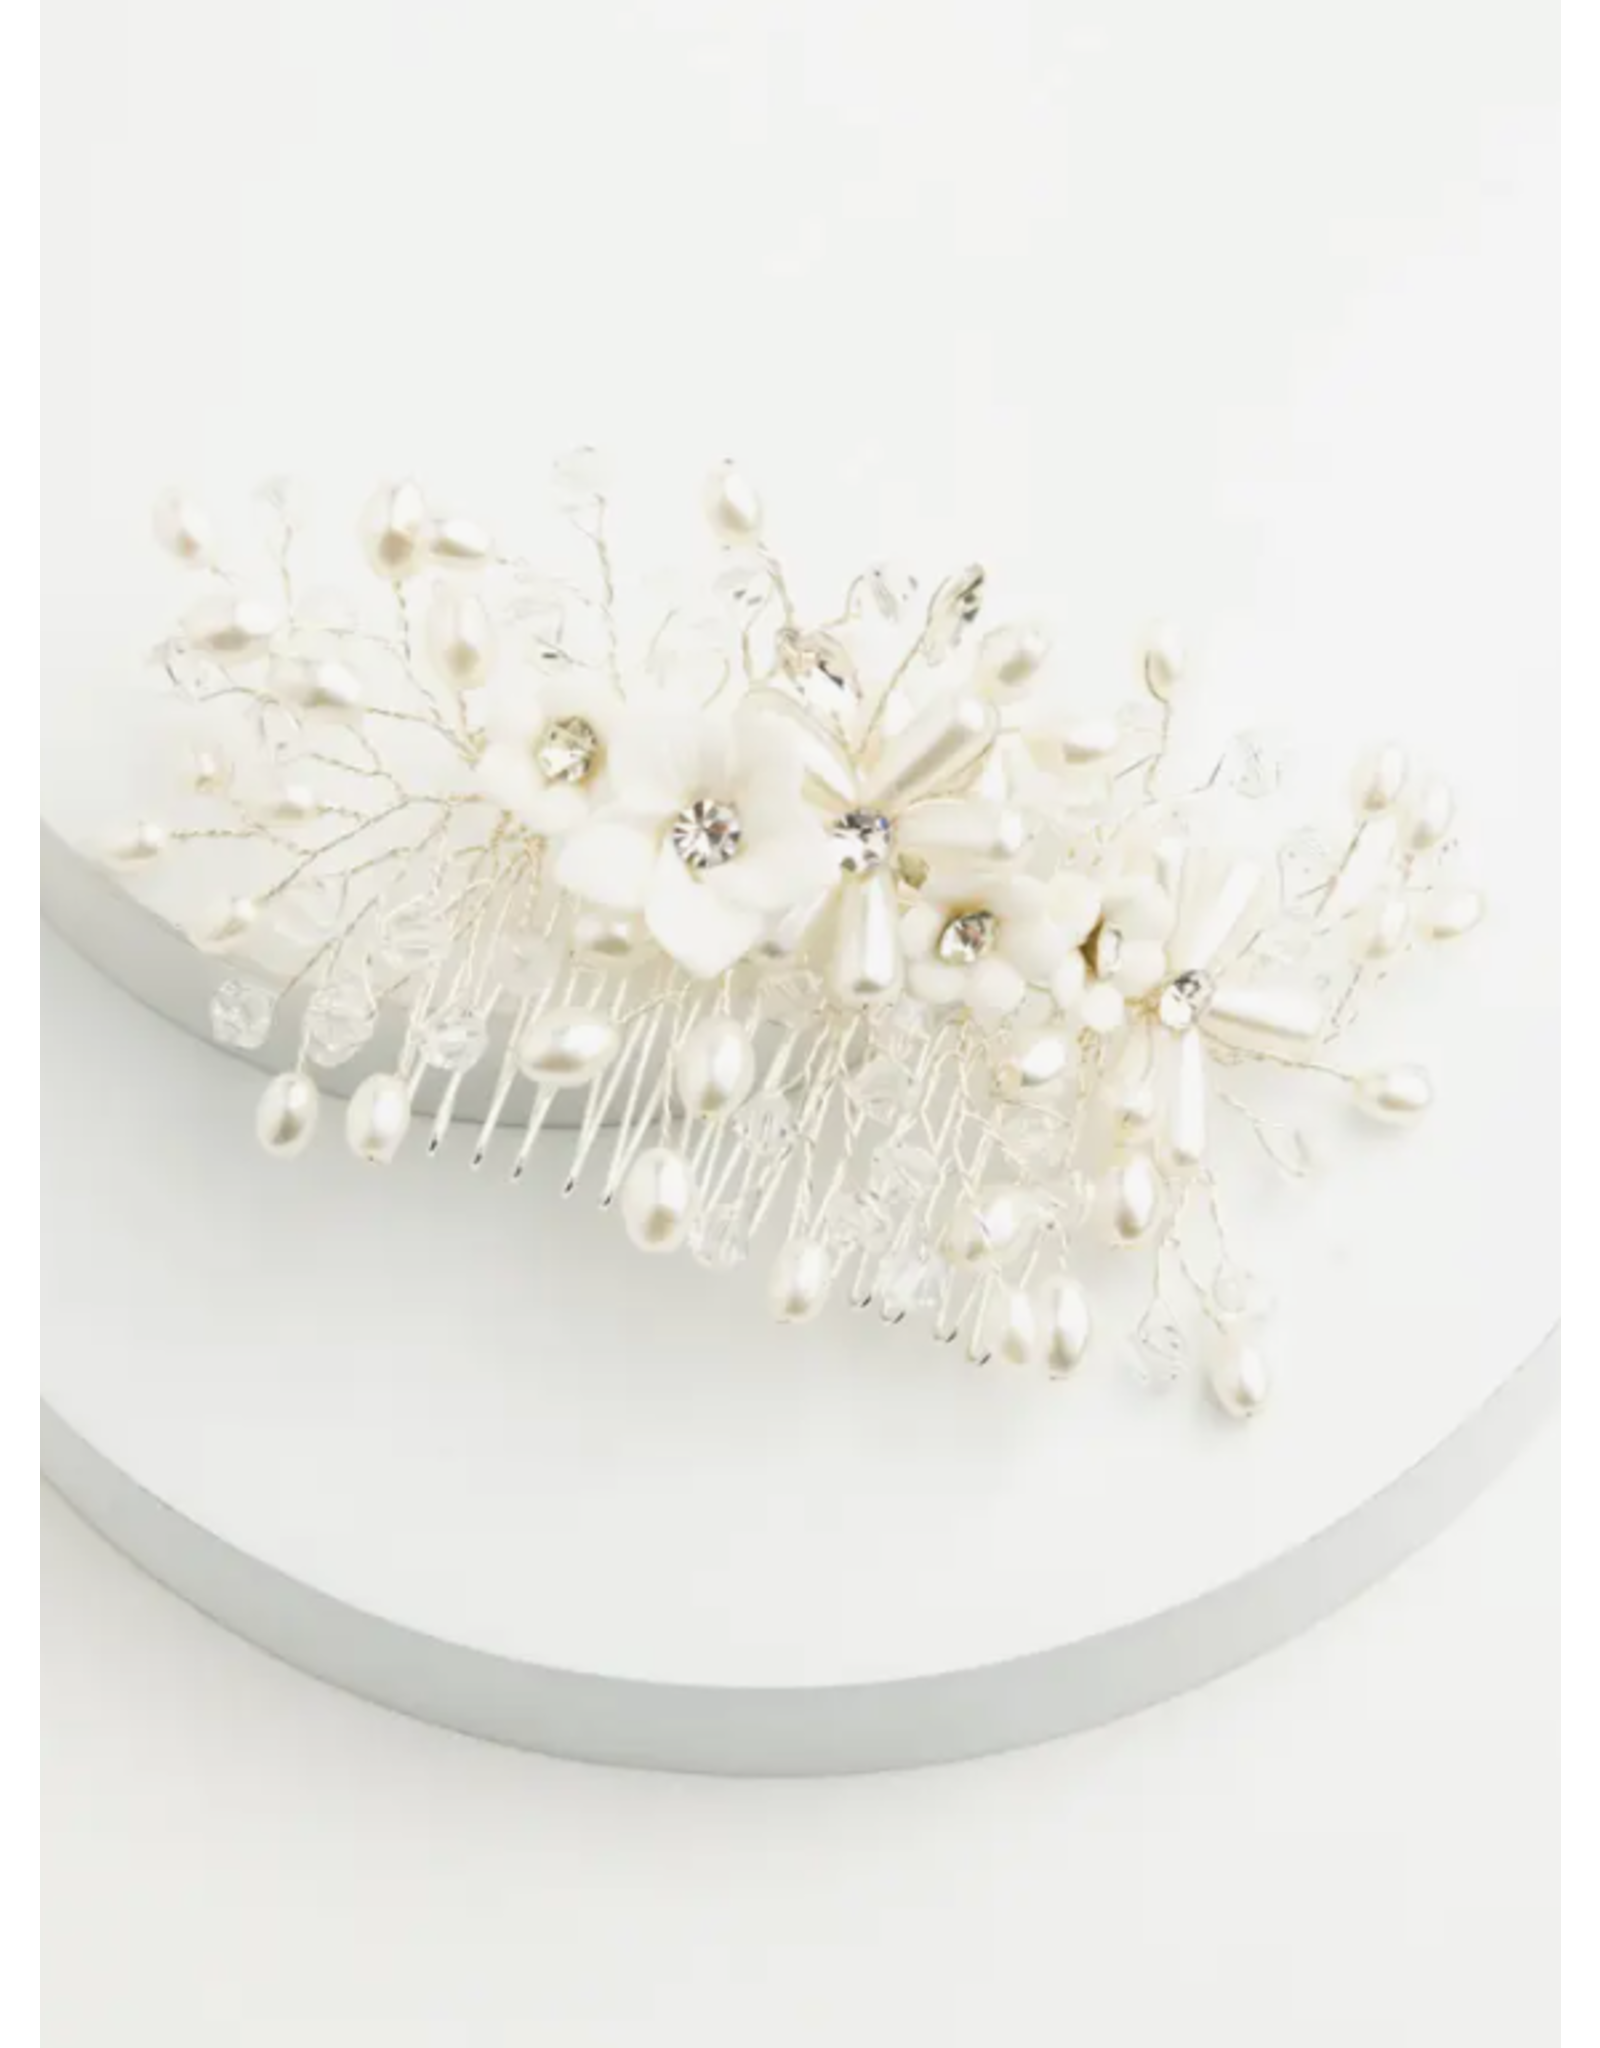 China Pearl Blossom Dainty Flower & Crystal Comb, China